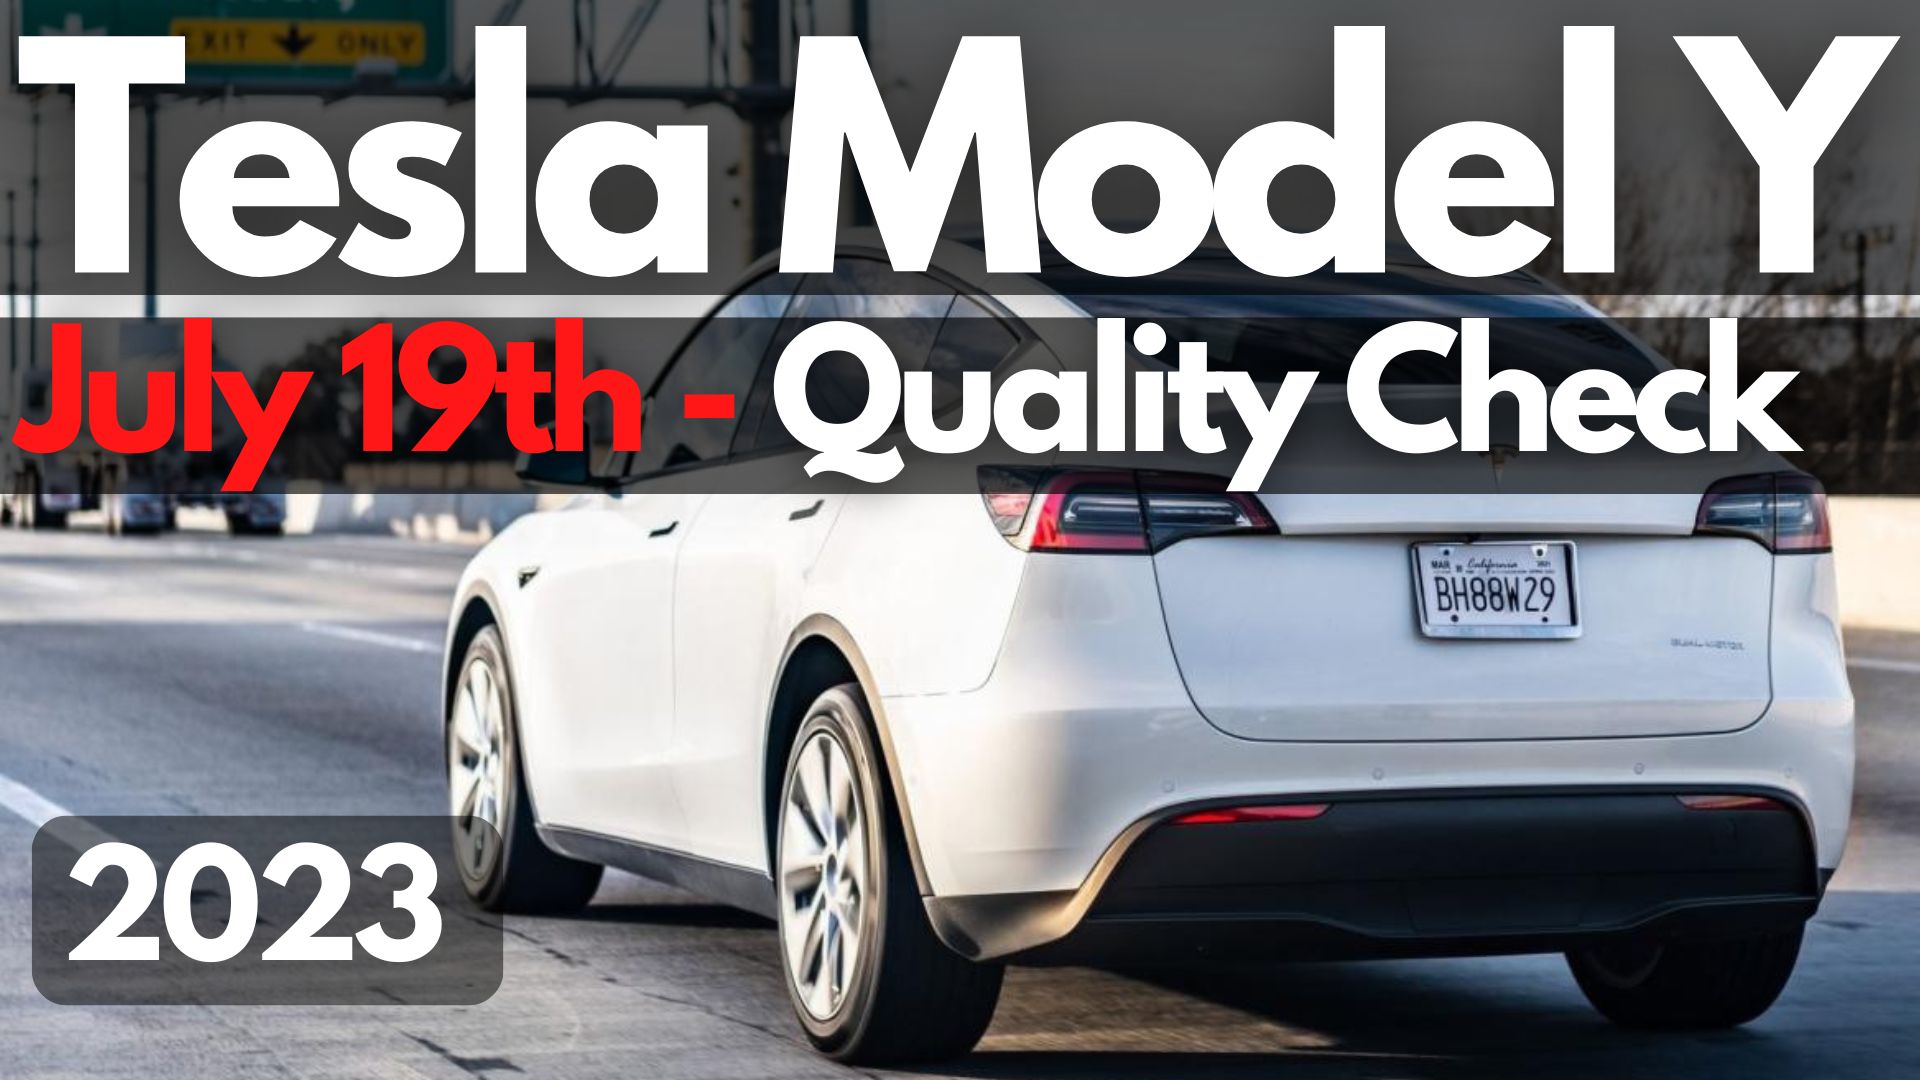 Has Tesla Improved The Model Y Build Quality For July 19, 2023?